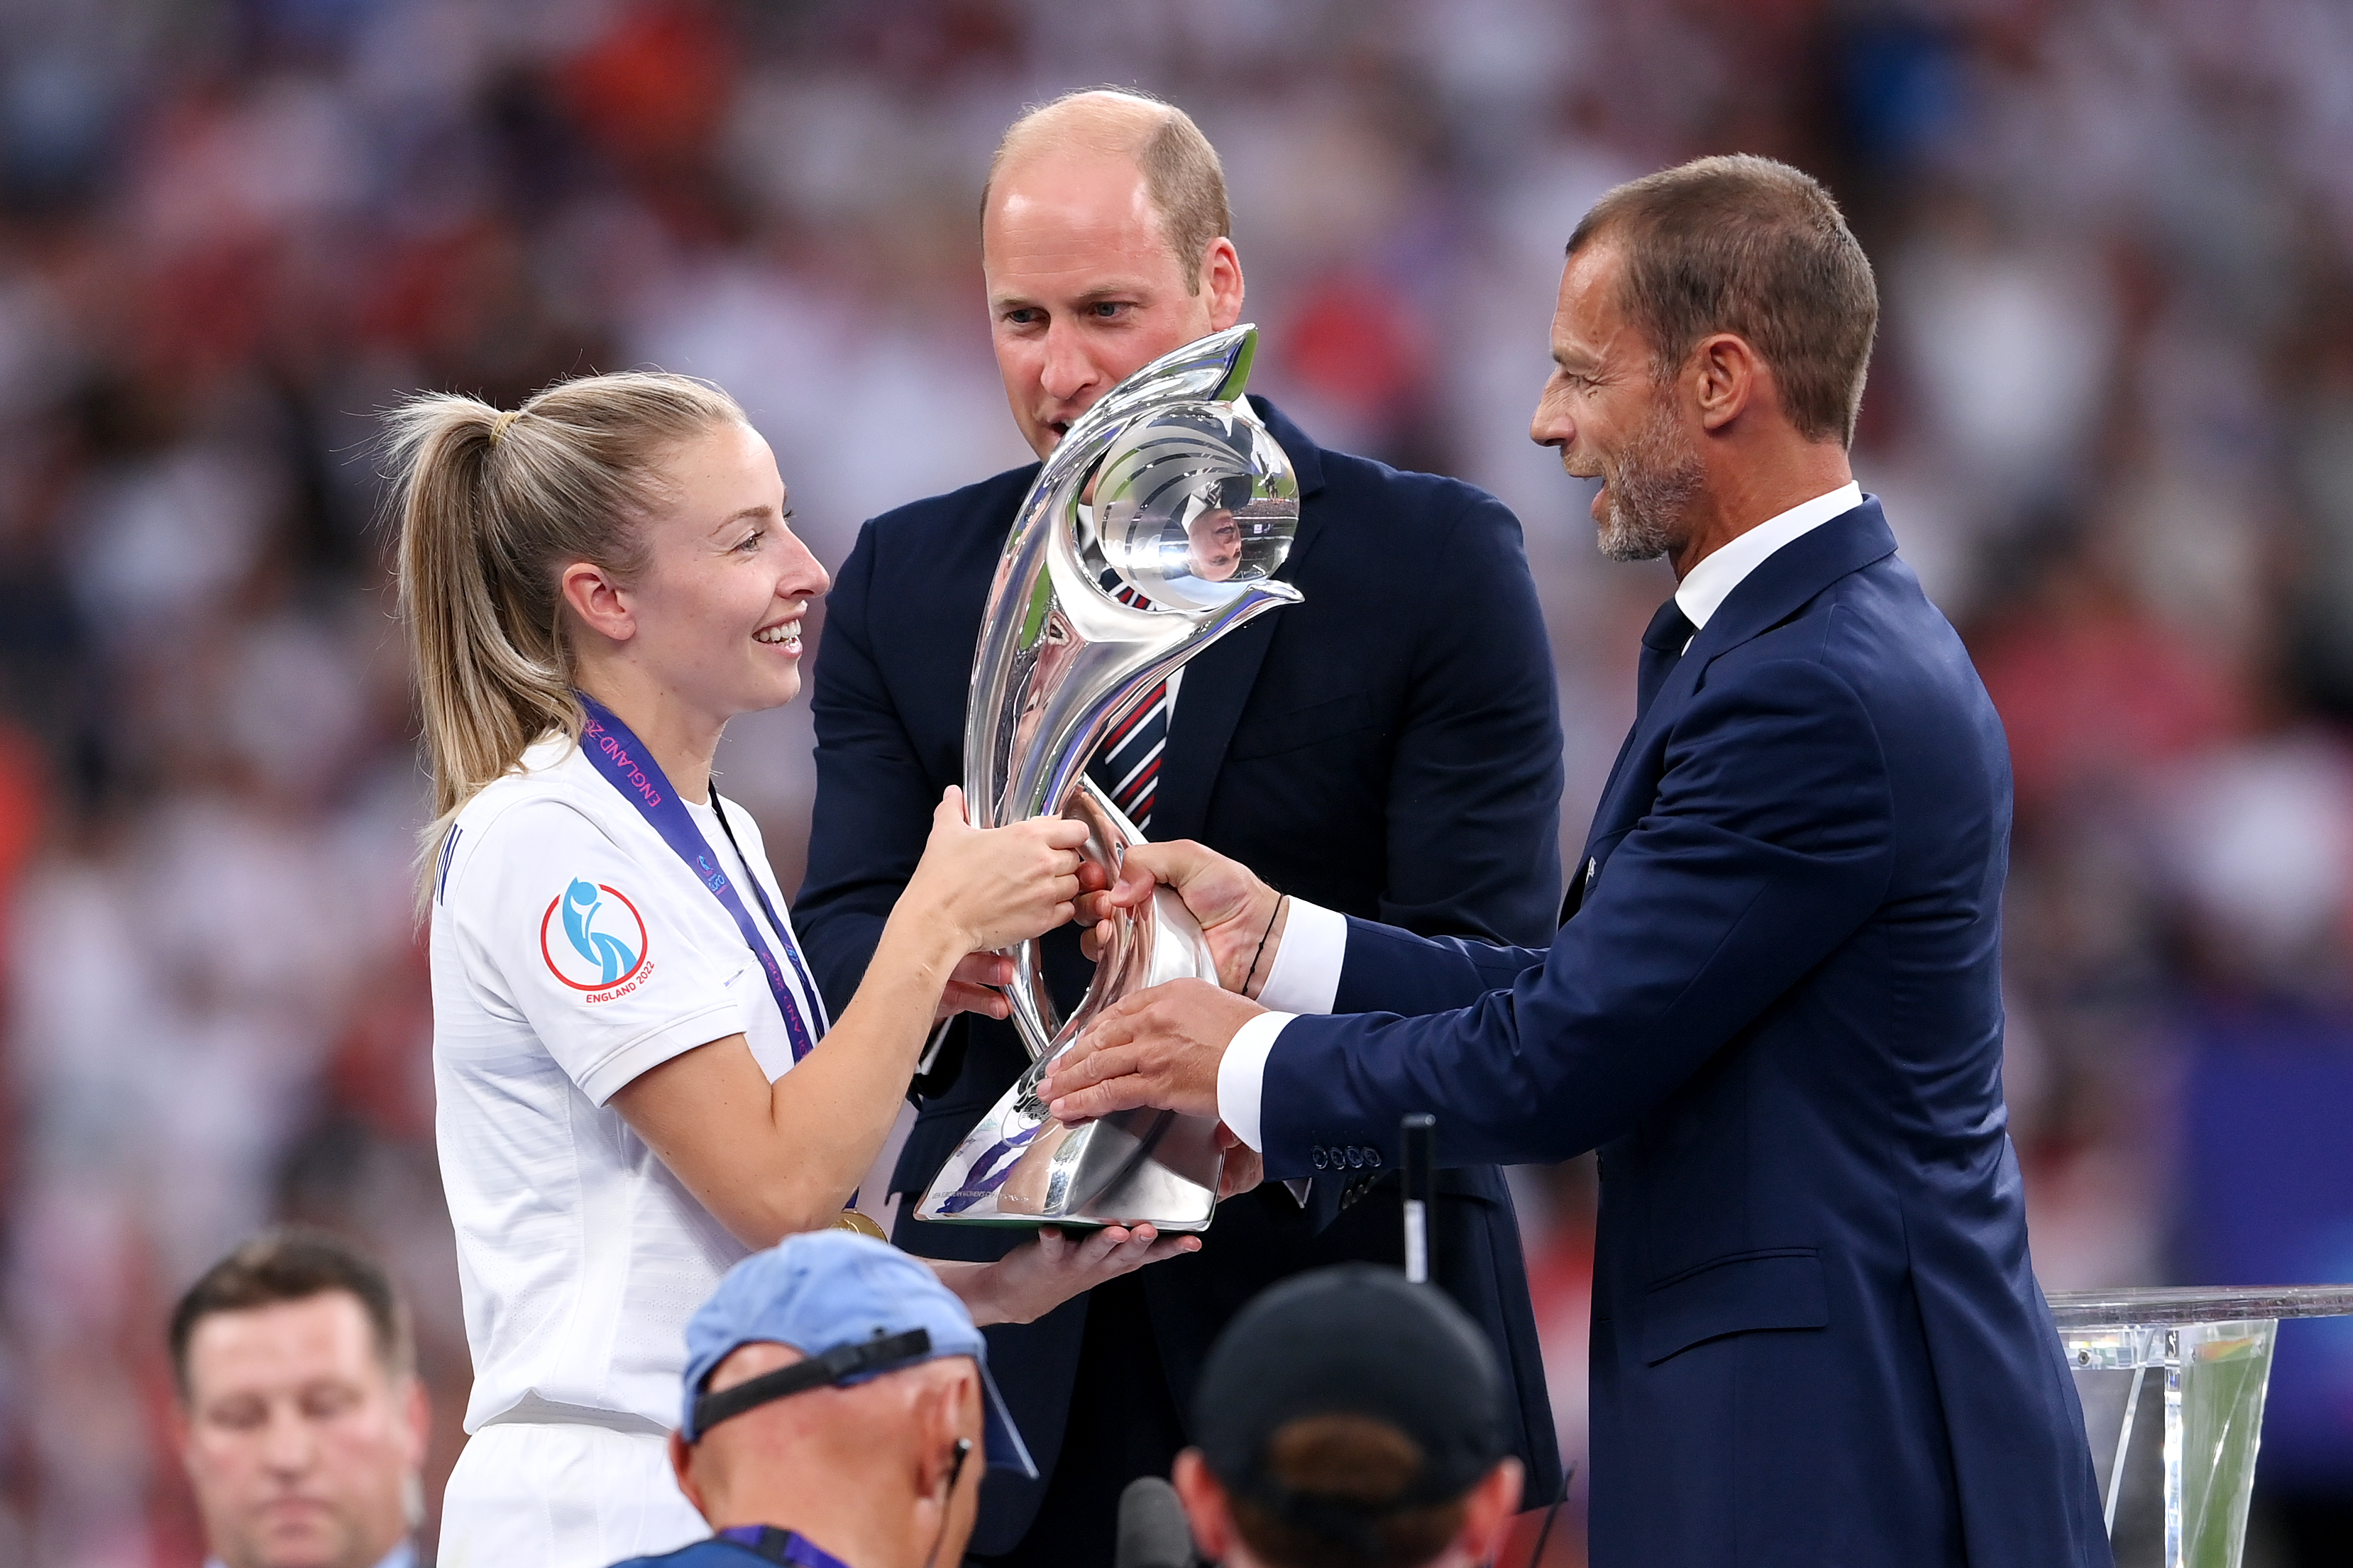 UEFA’s historic announcement: the Women’s Nations League is born and will qualify for Paris 2024